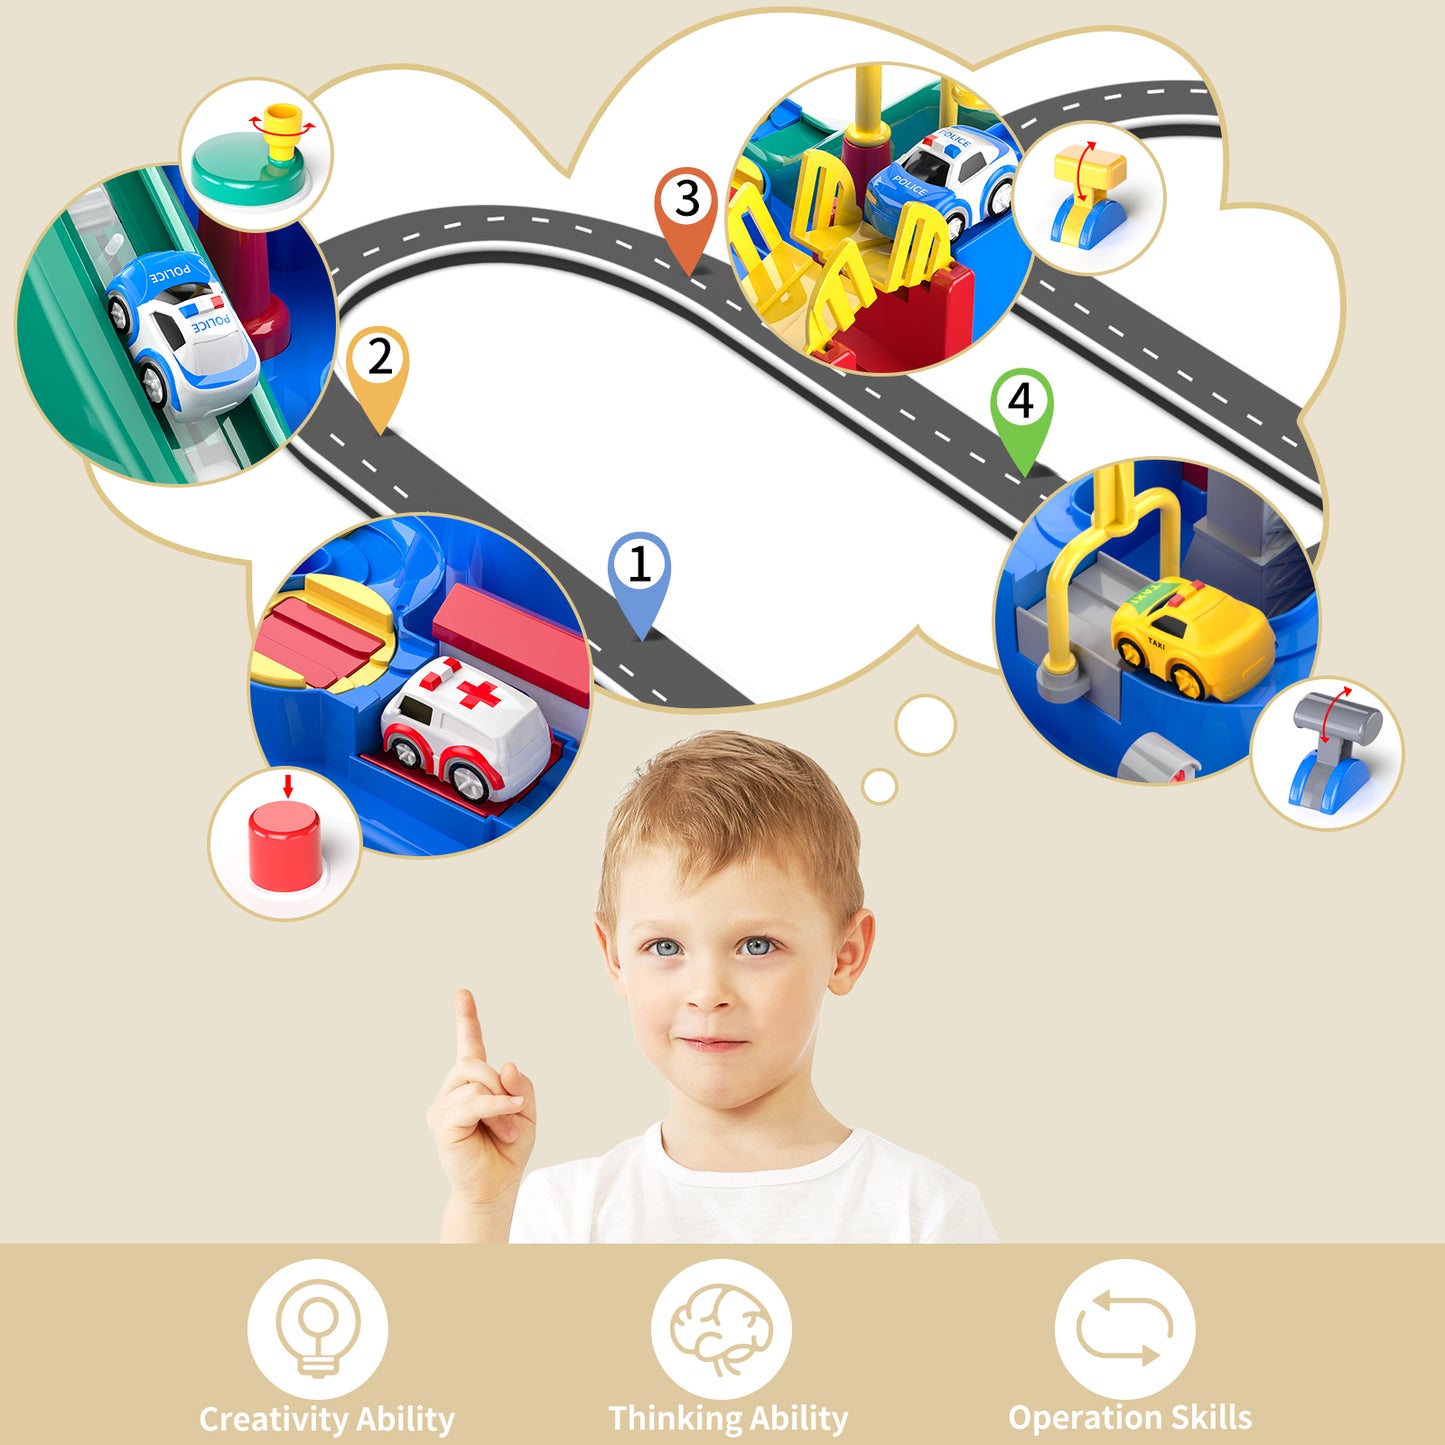 Kids Race Track Toys For Boy Car Adventure Toy For 3 4 5 6 7 Years Old Boys Girls, Puzzle Rail Car, City Rescue Playsets Magnet Toys W/ 3 Mini Cars, Preschool Educational Car Games Gift Toys